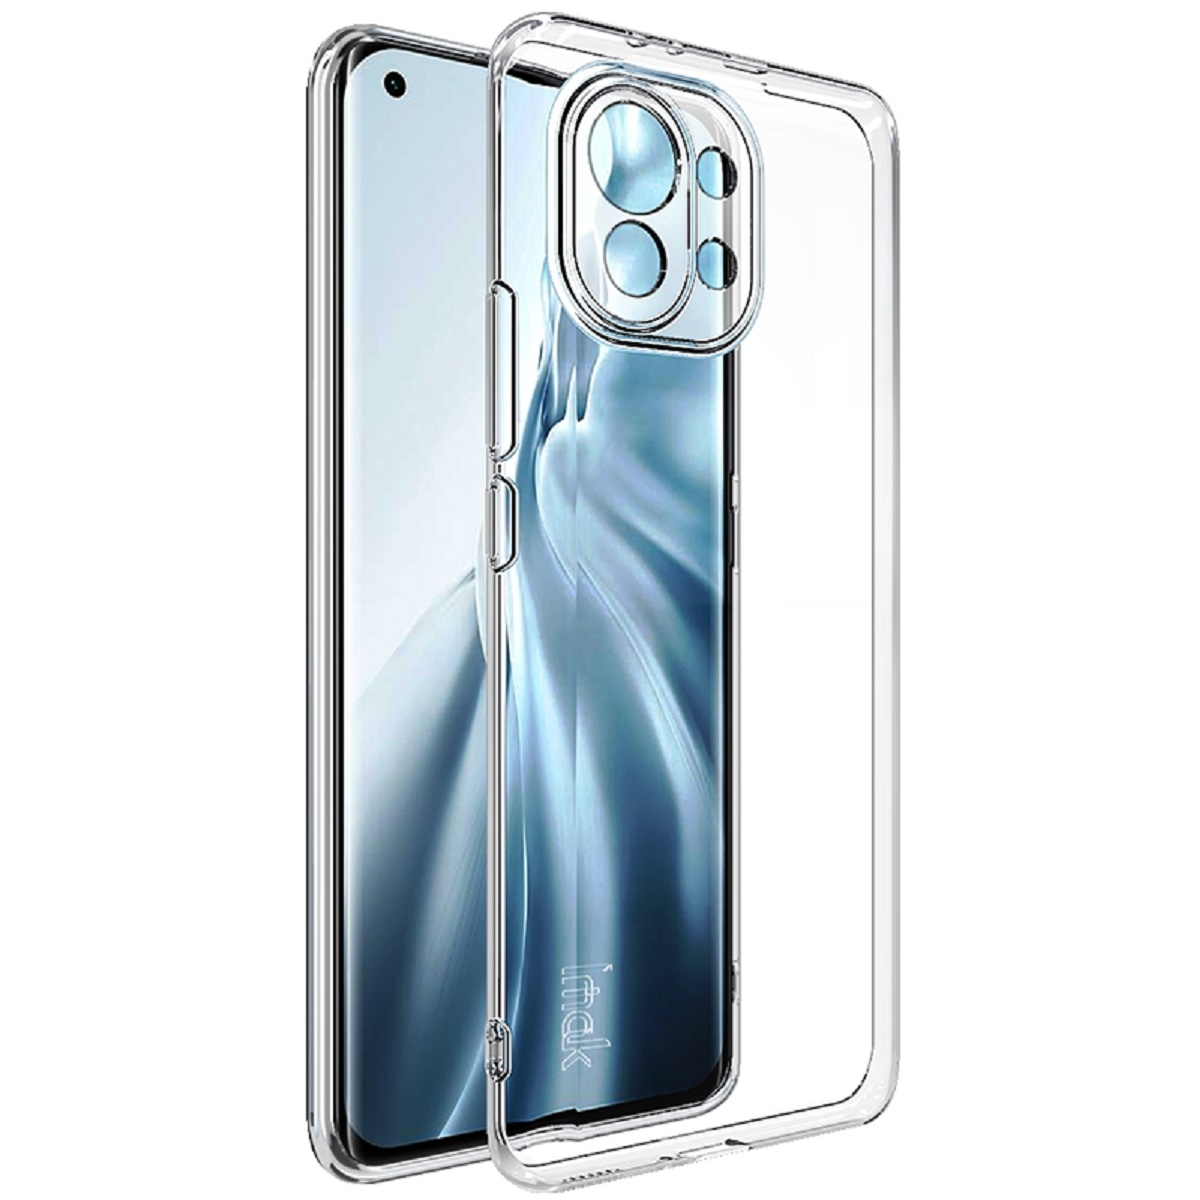 Transparent 11, Xiaomi, PROTECTORKING Backcover, Backcover, Hülle, Mi